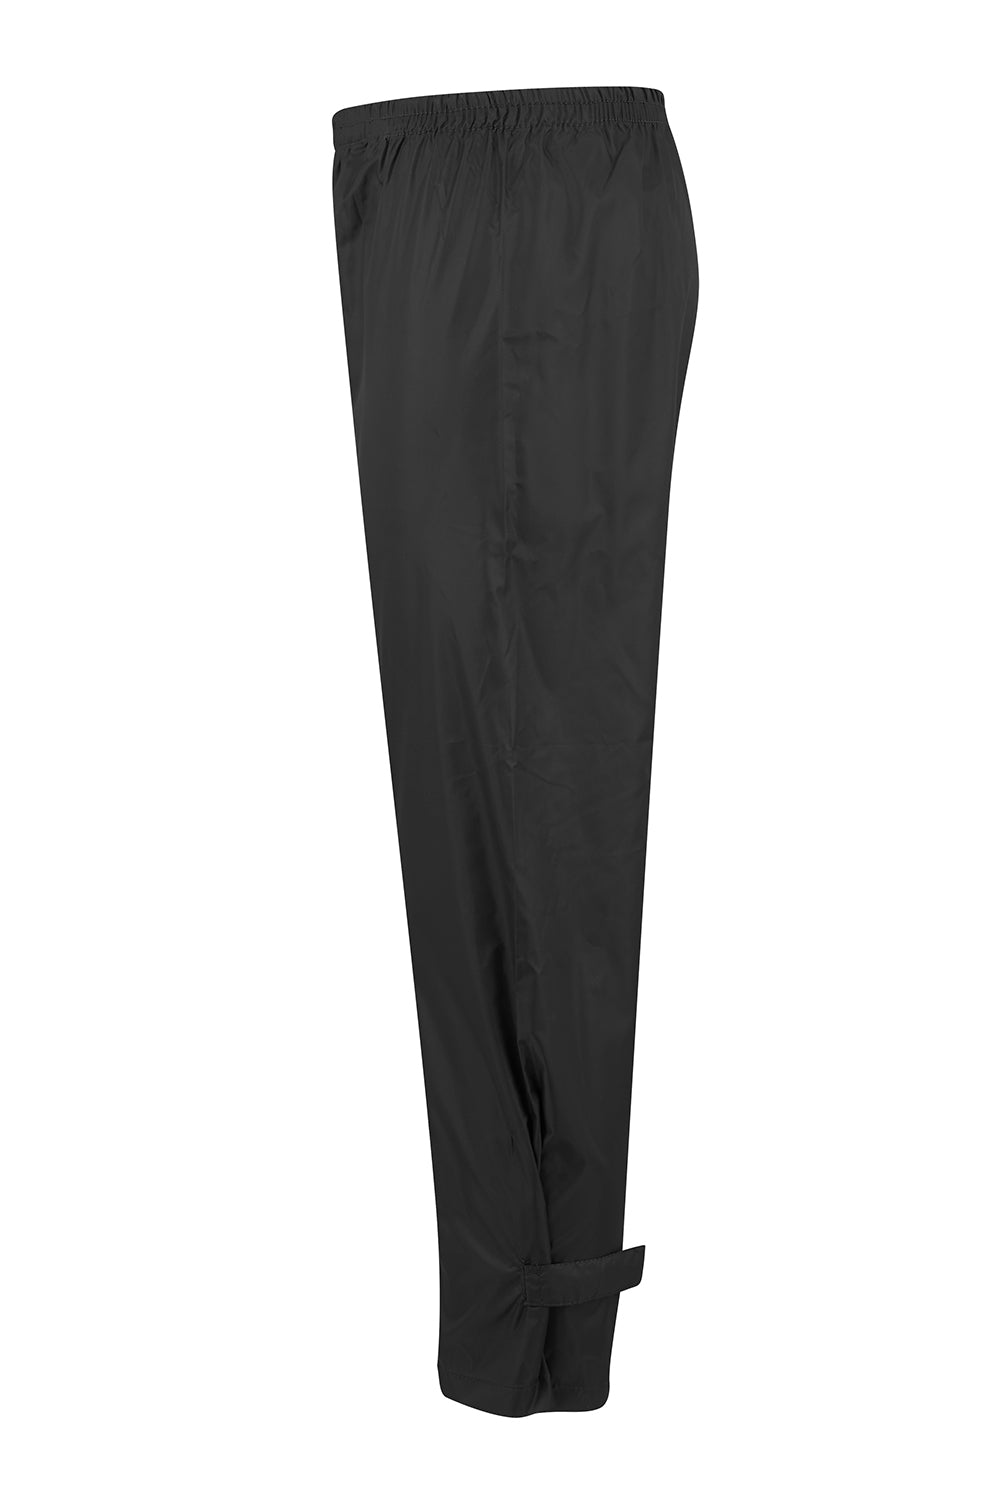 Overtrousers Mini Kids Overtrousers - Black